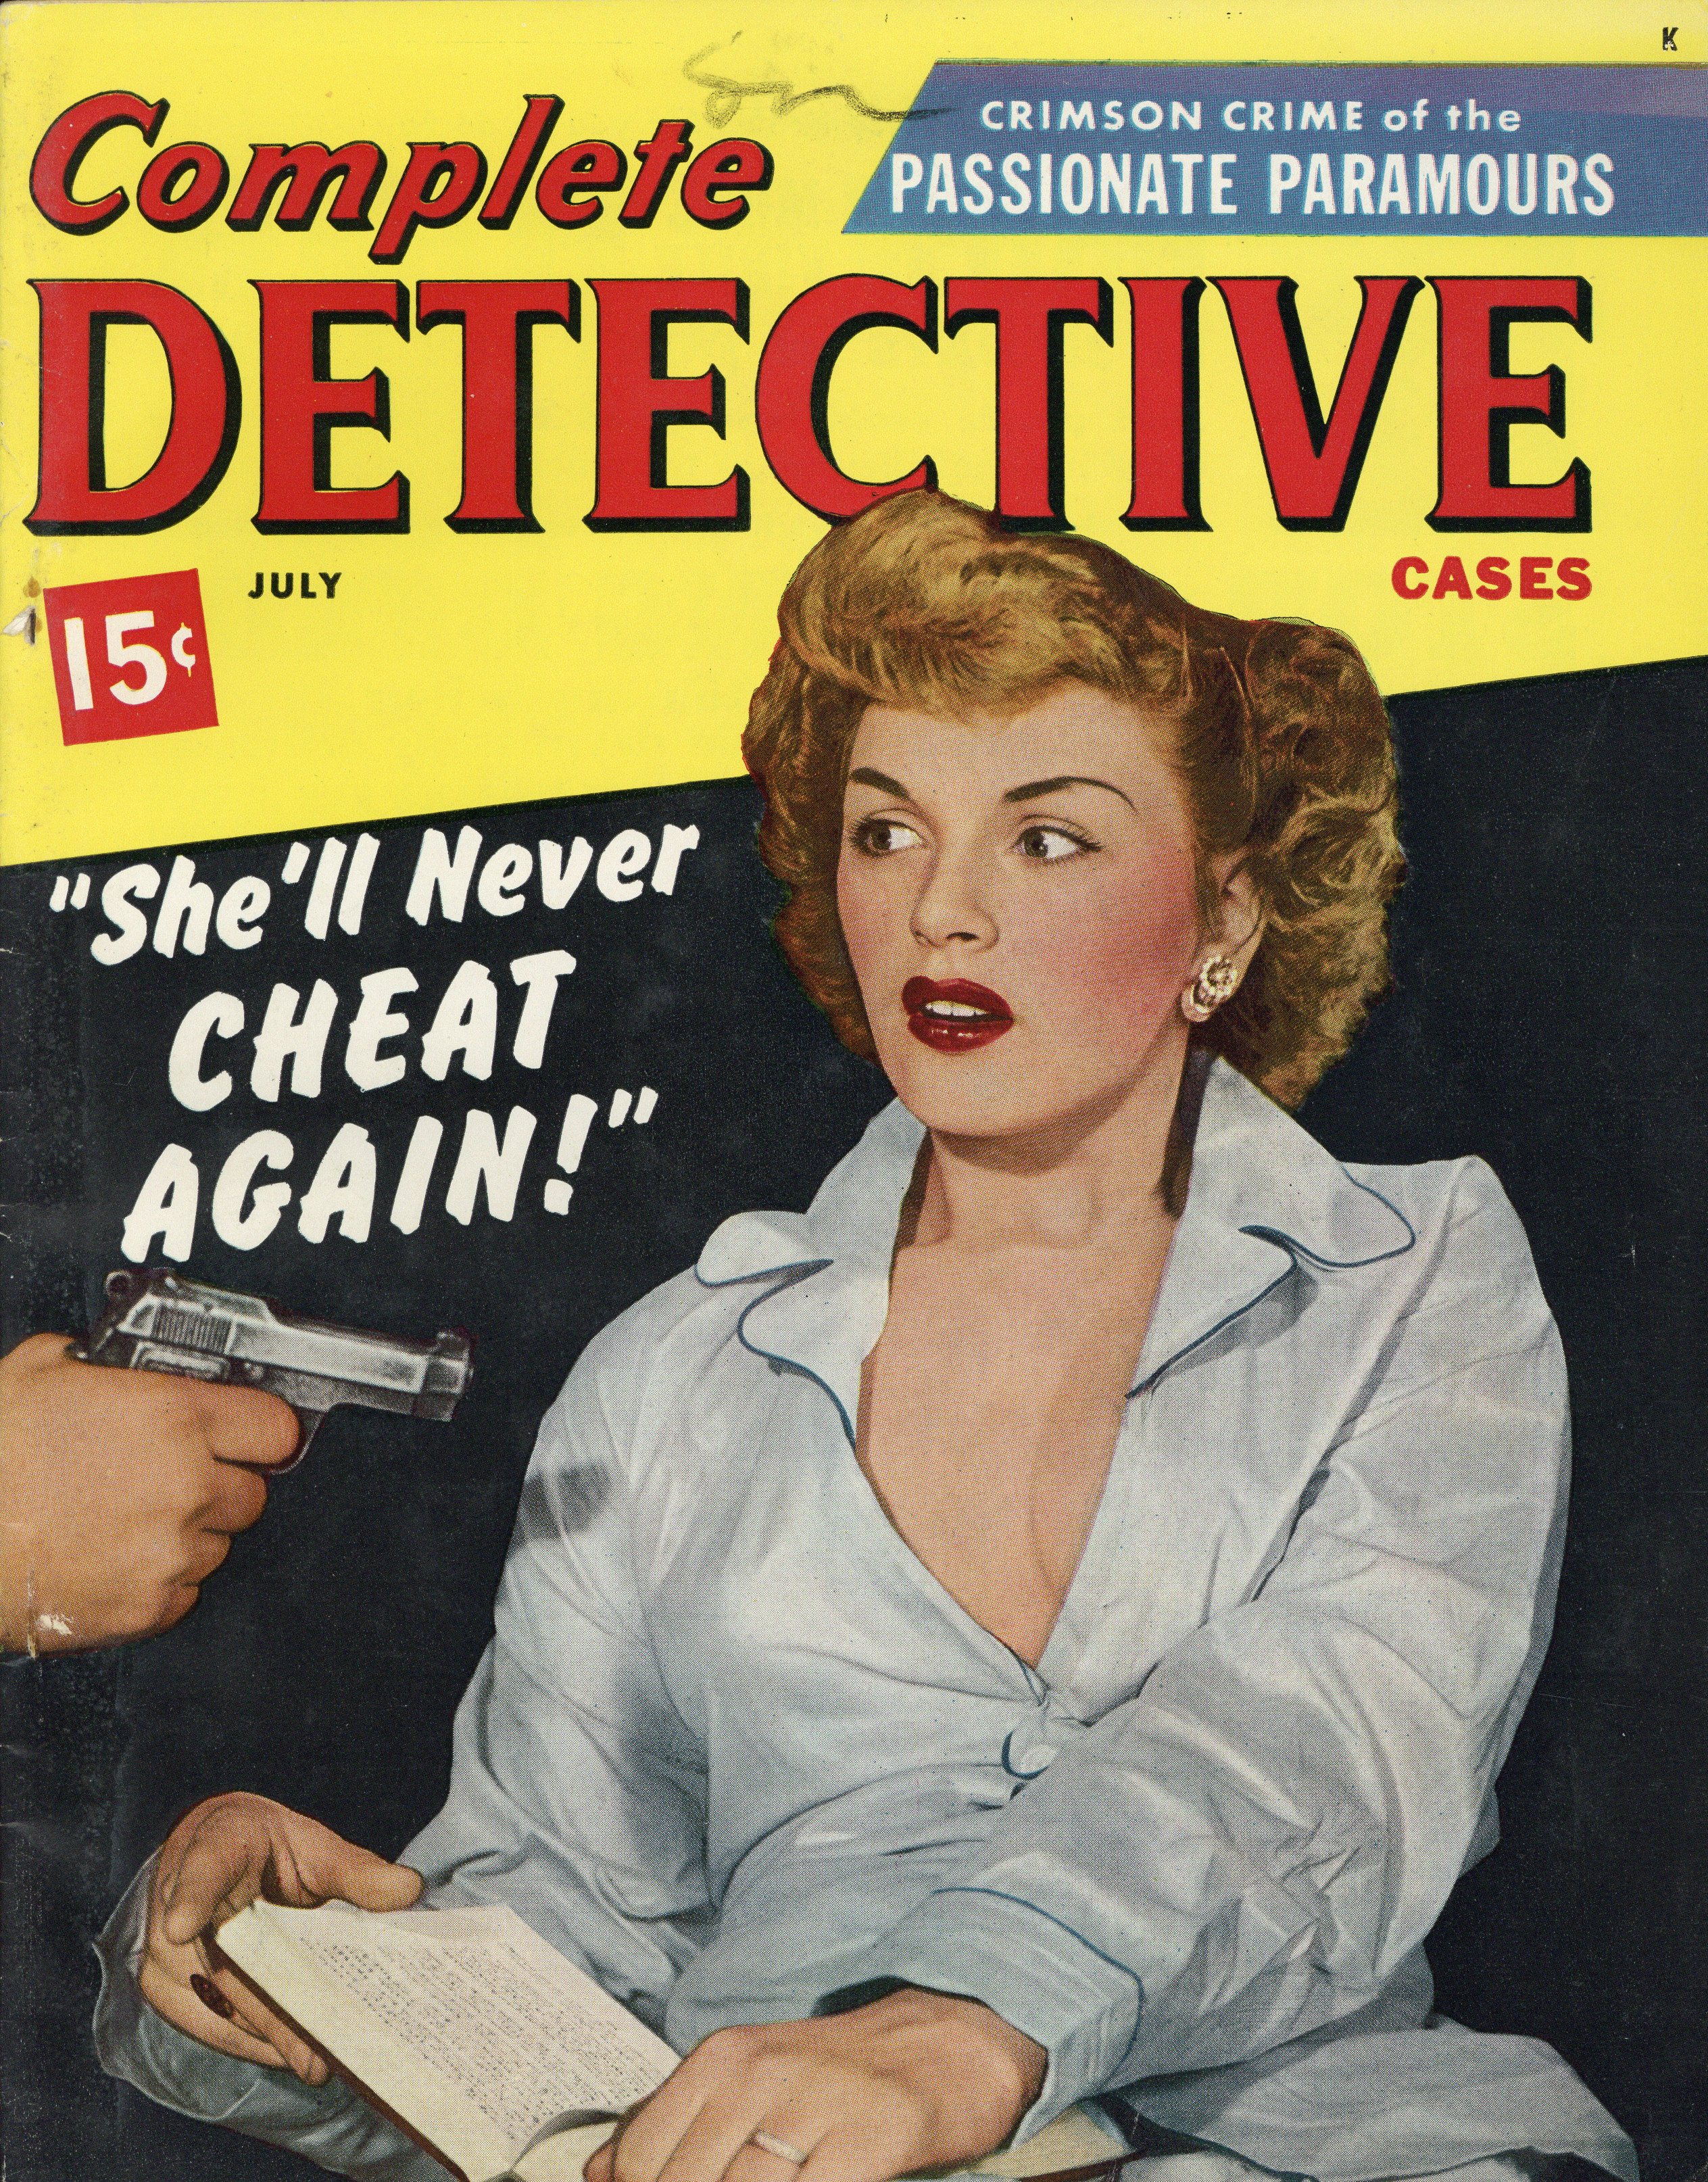 Complete Detective Cases July 1950